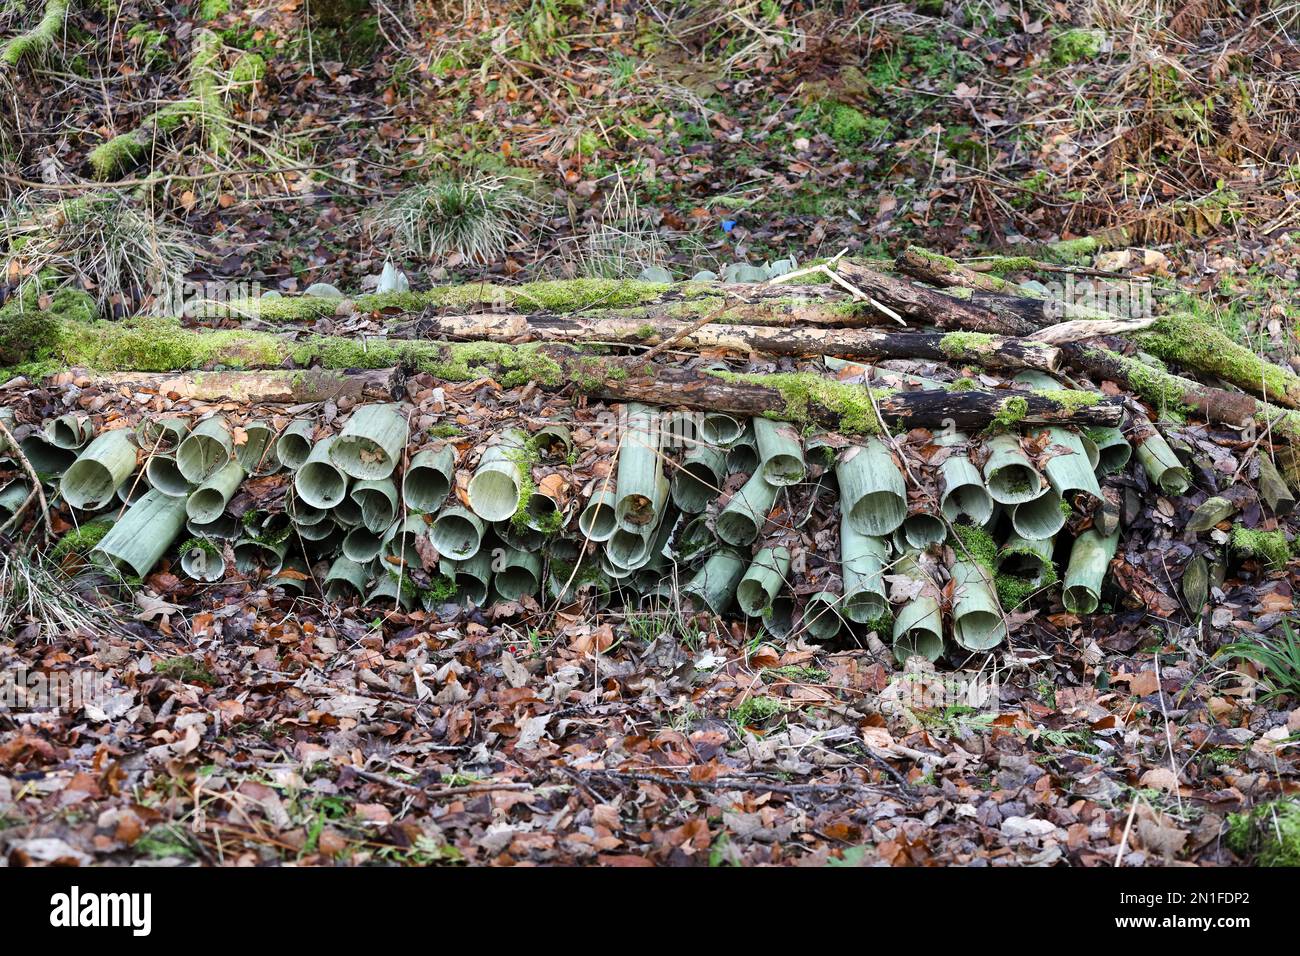 Used Plastic Tree Guards Left in a Woodland, UK Stock Photo